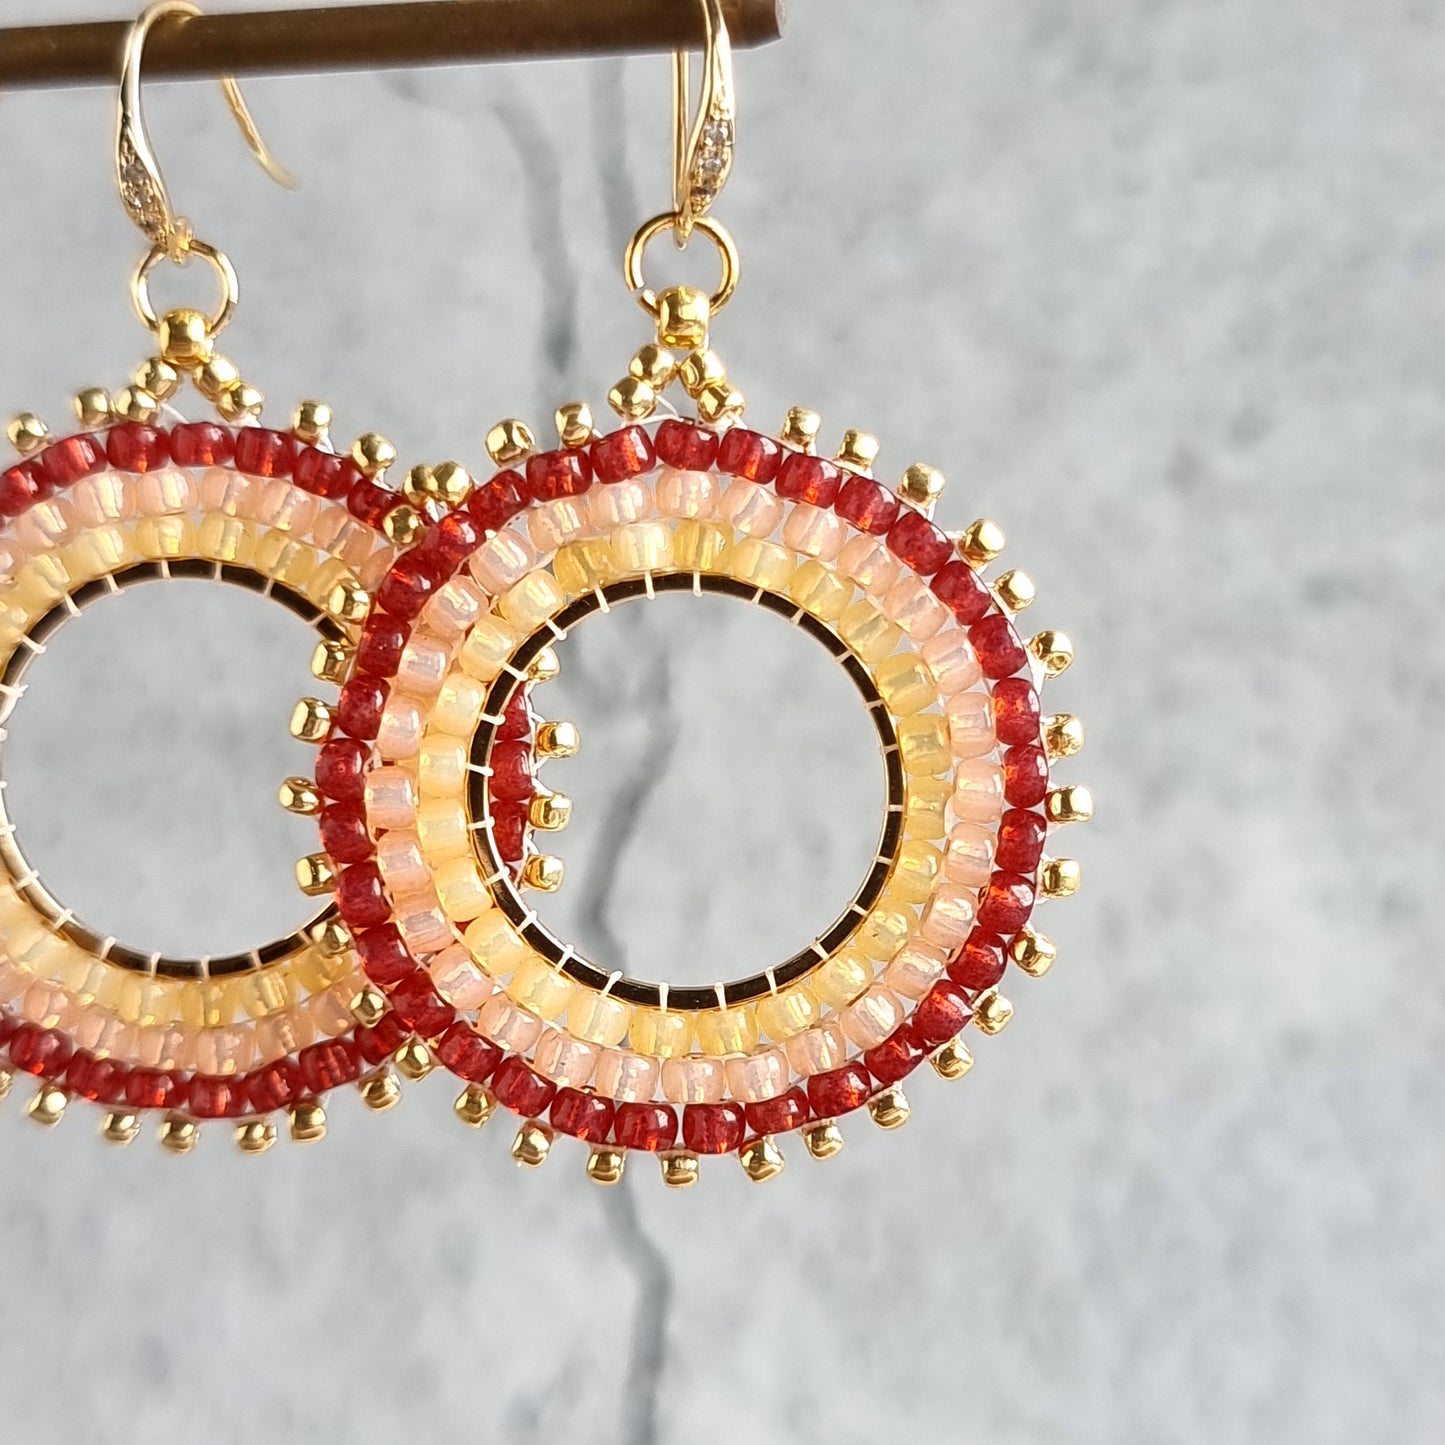 Circular Brick stitch Ombre - Hoop Earrings (Seed Bead) - Red